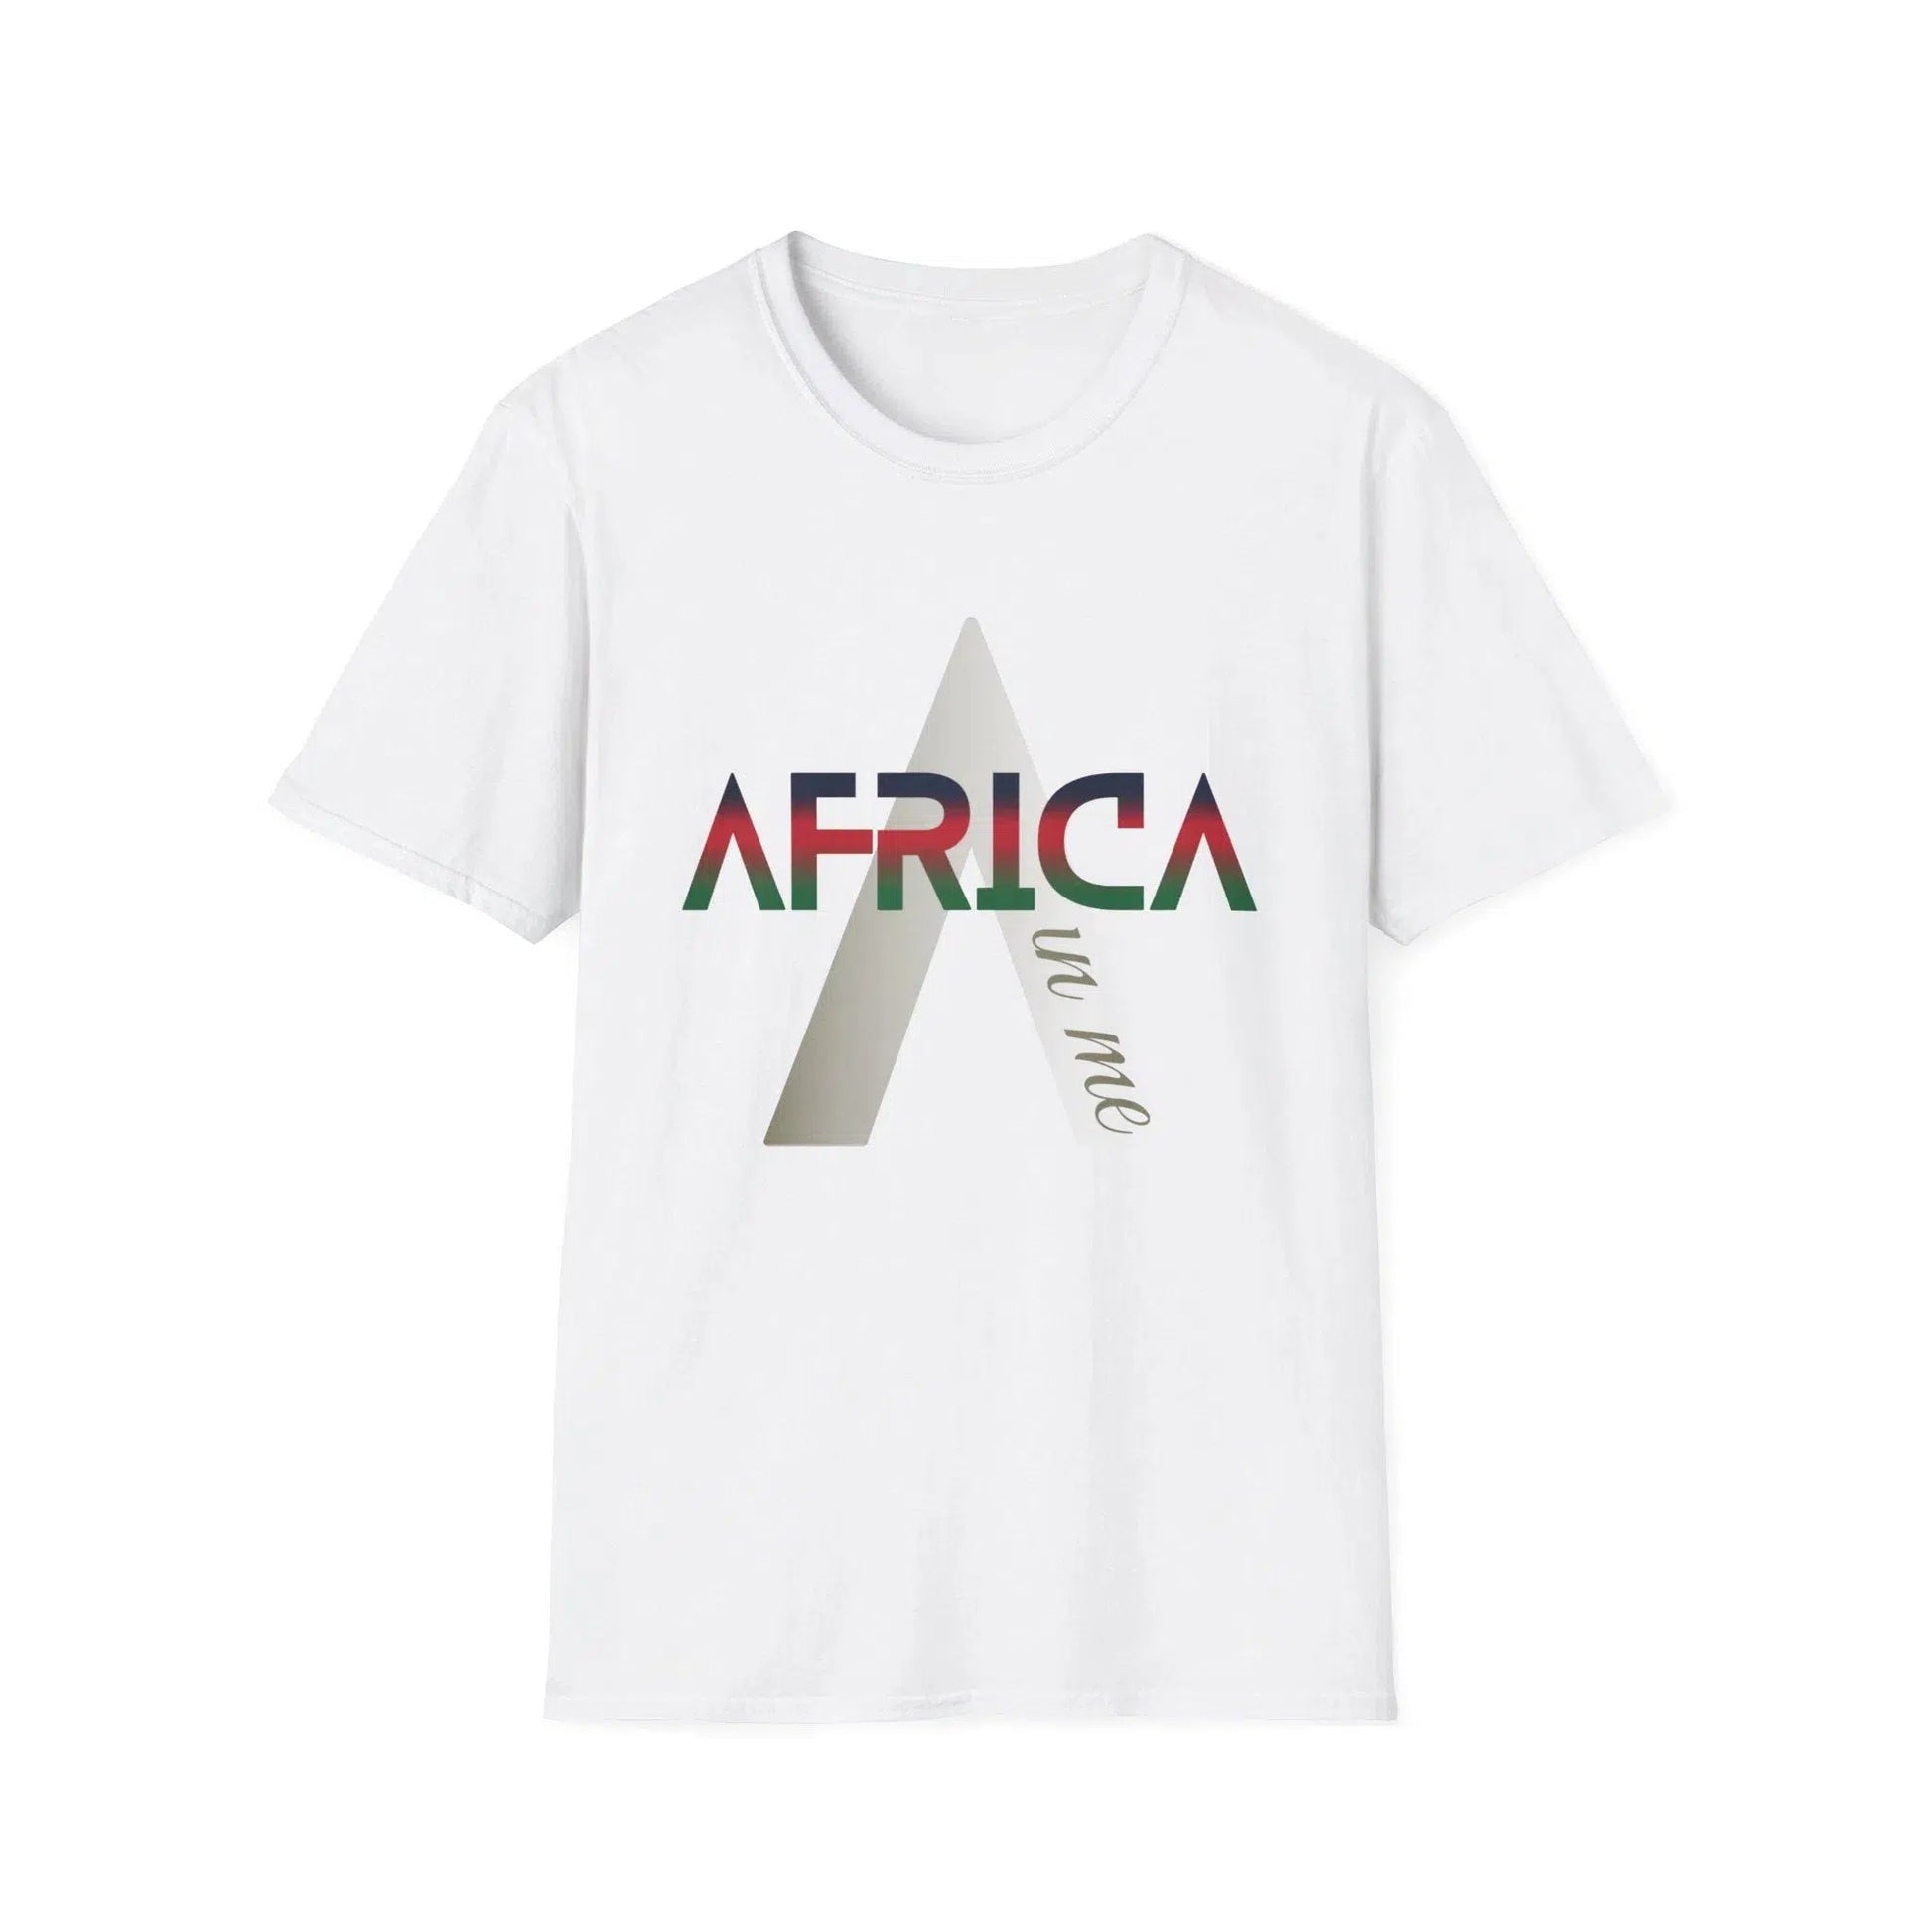 African American T shirts Black Culture history